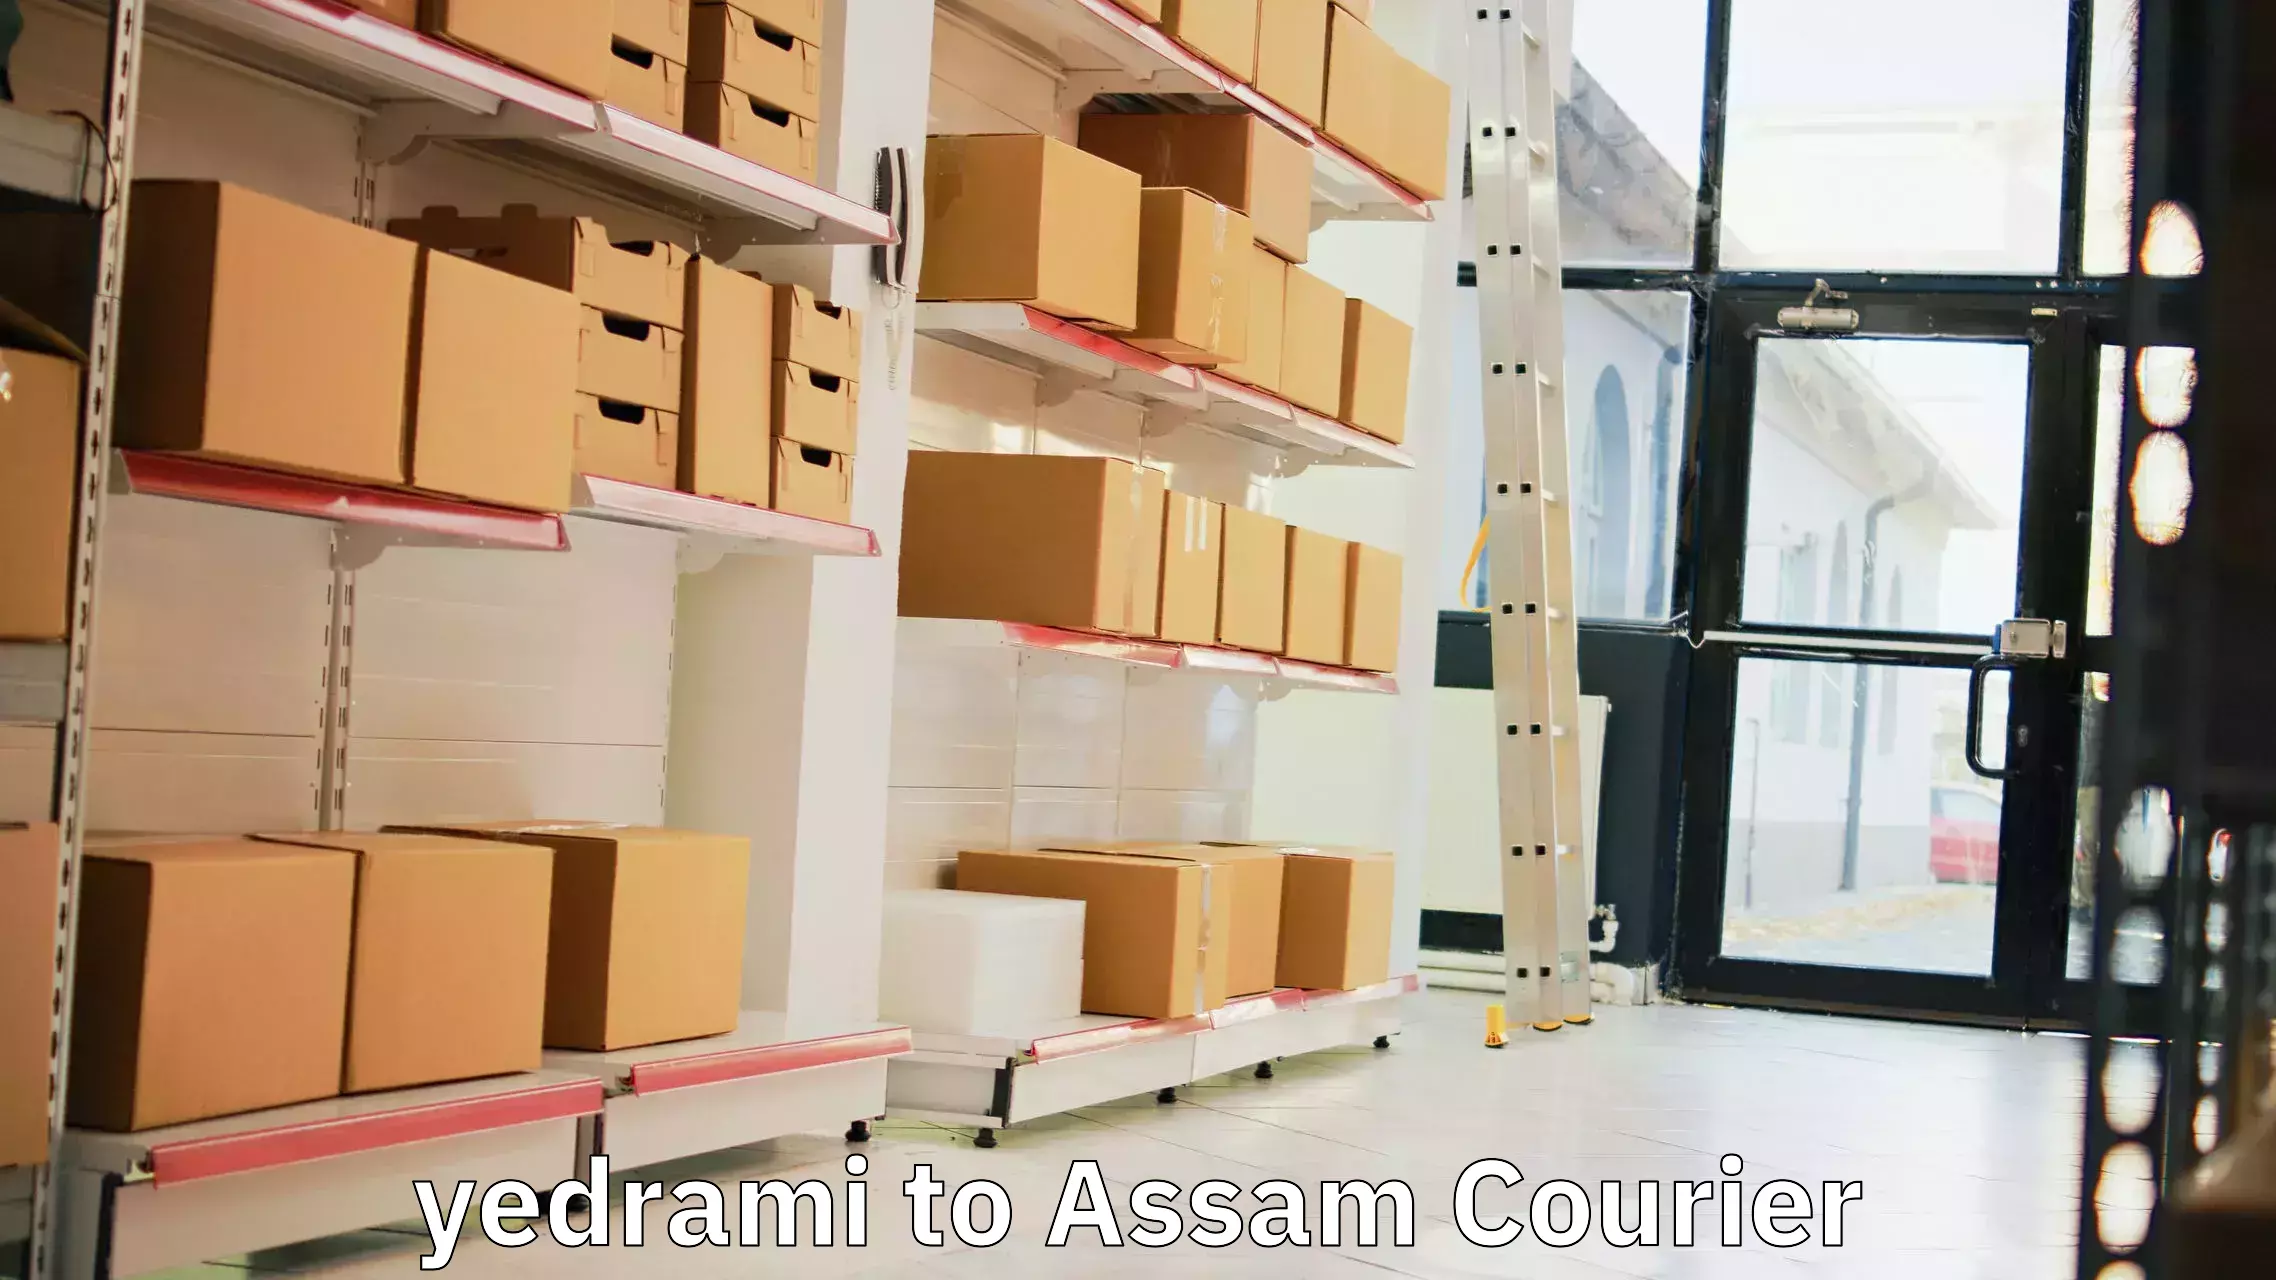 24-hour courier services yedrami to Amoni